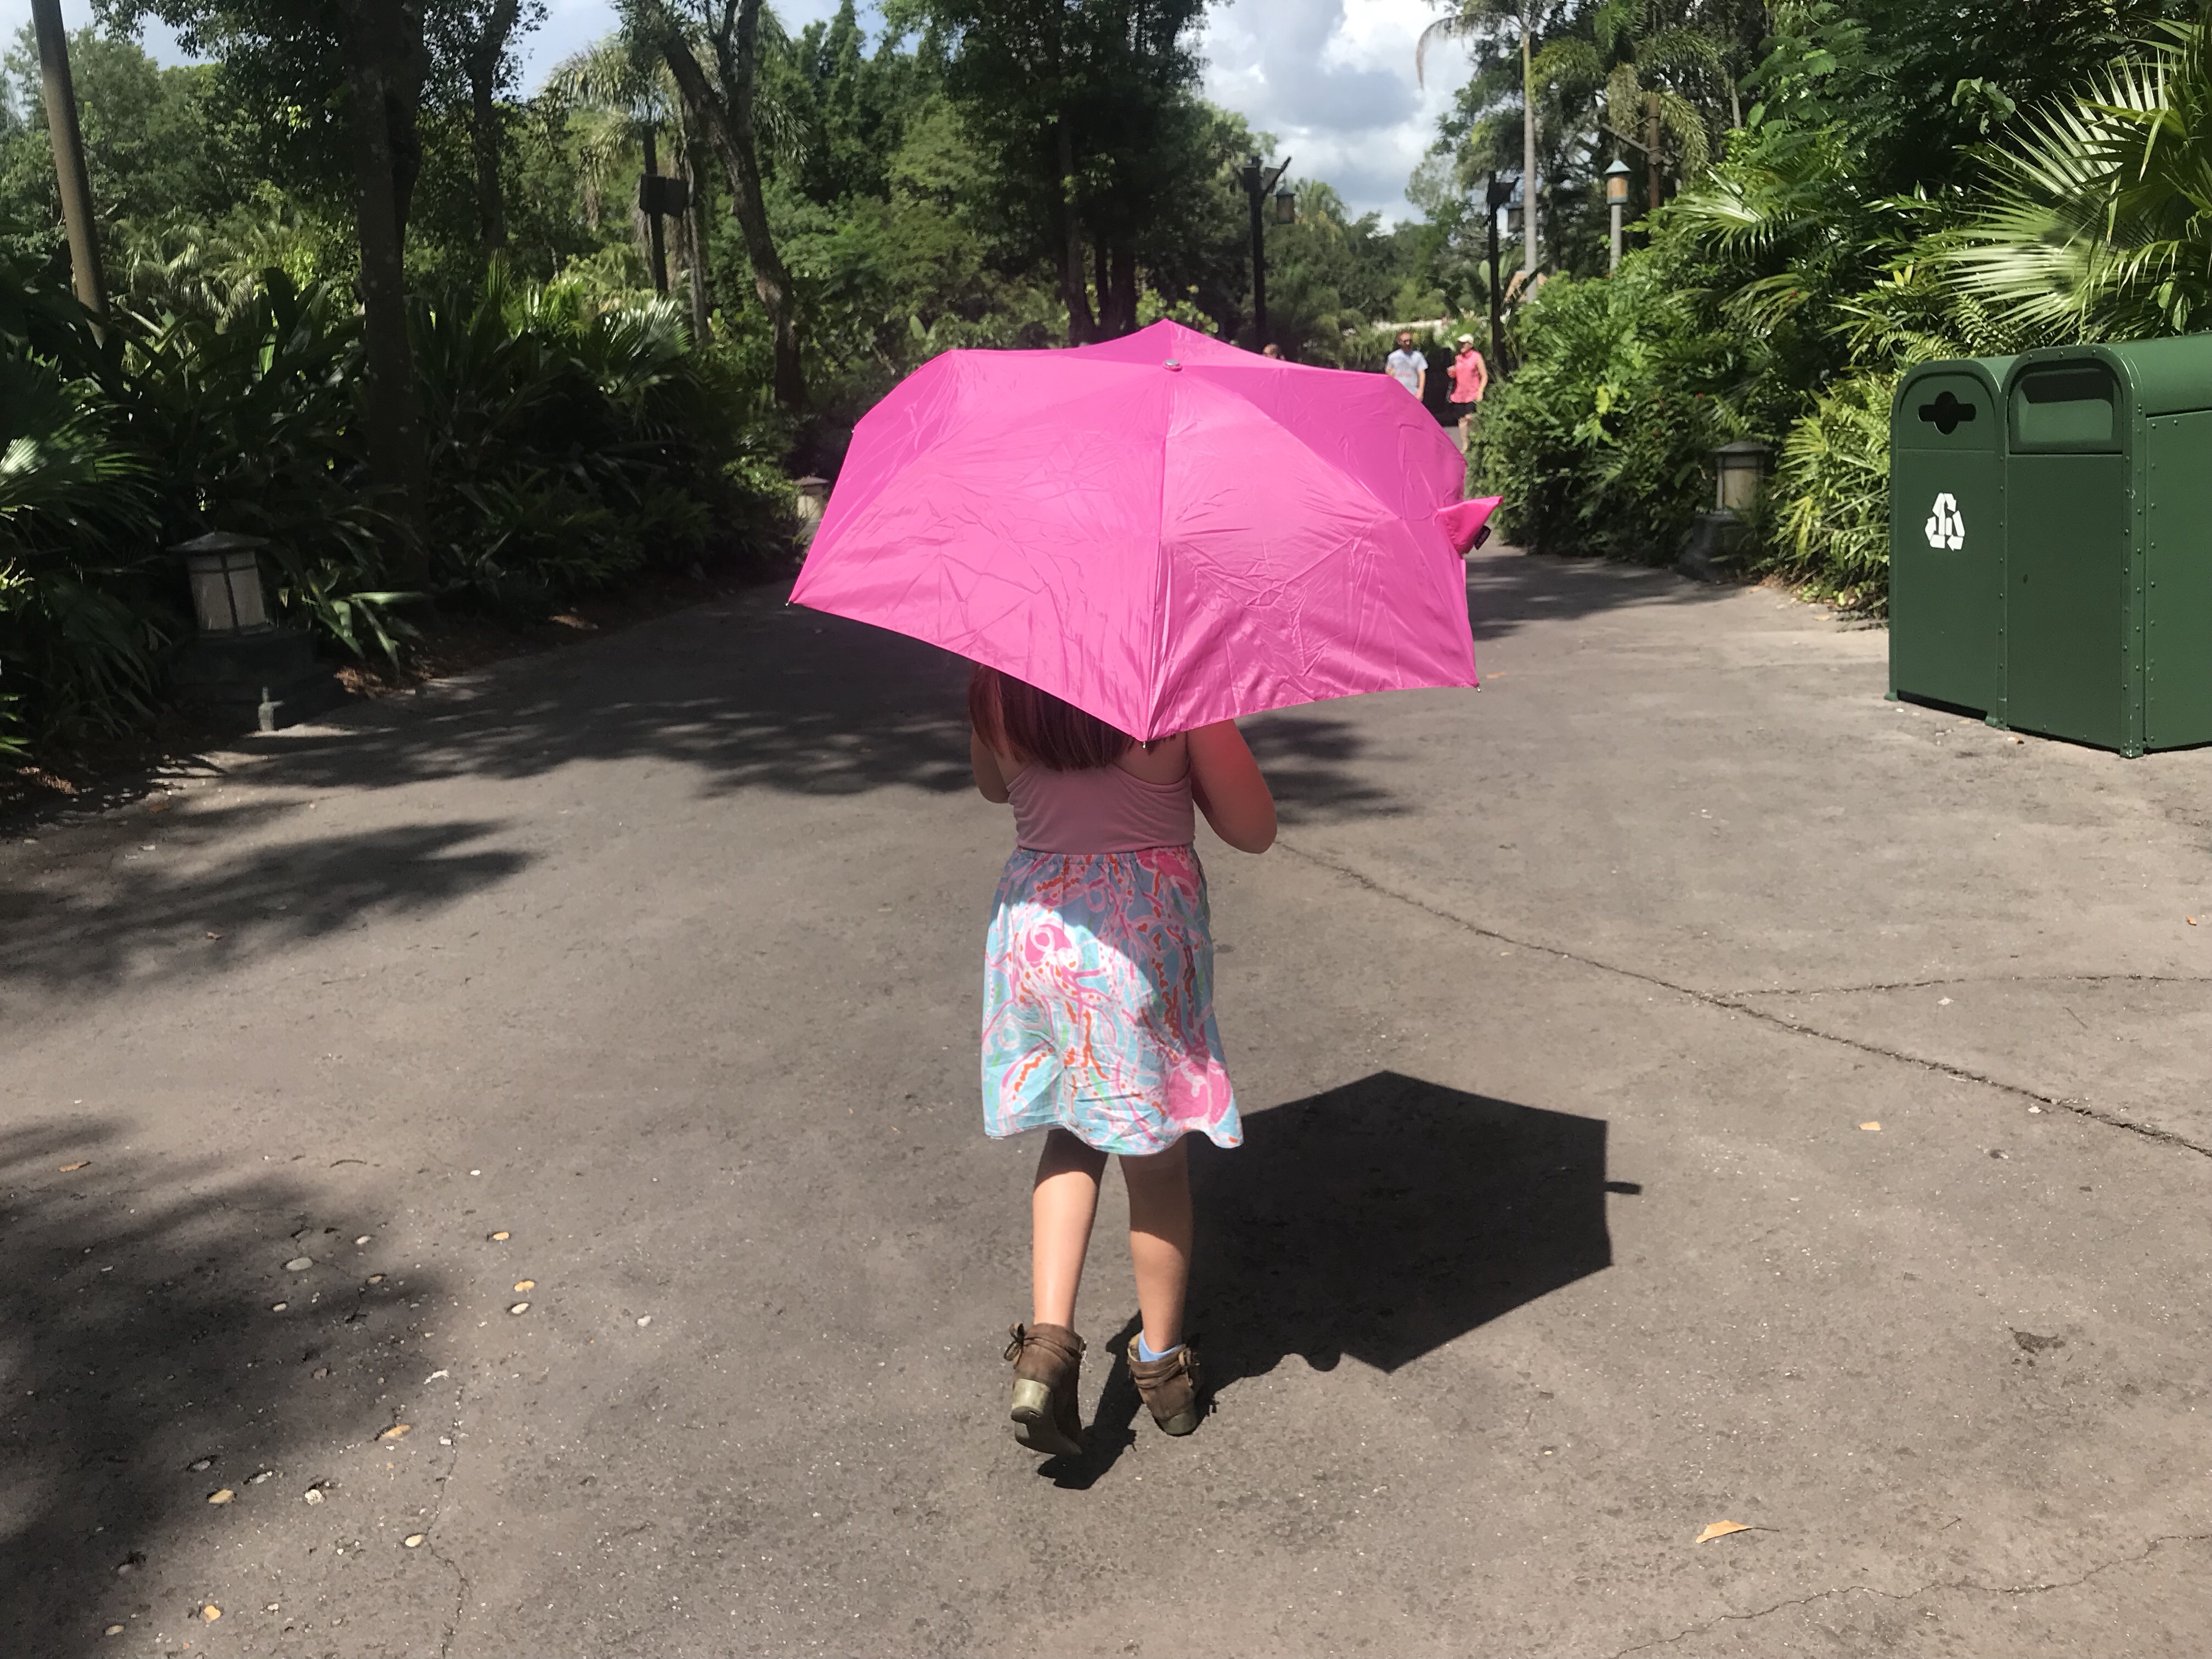 Disney World Summer: Tips to Stay Cool